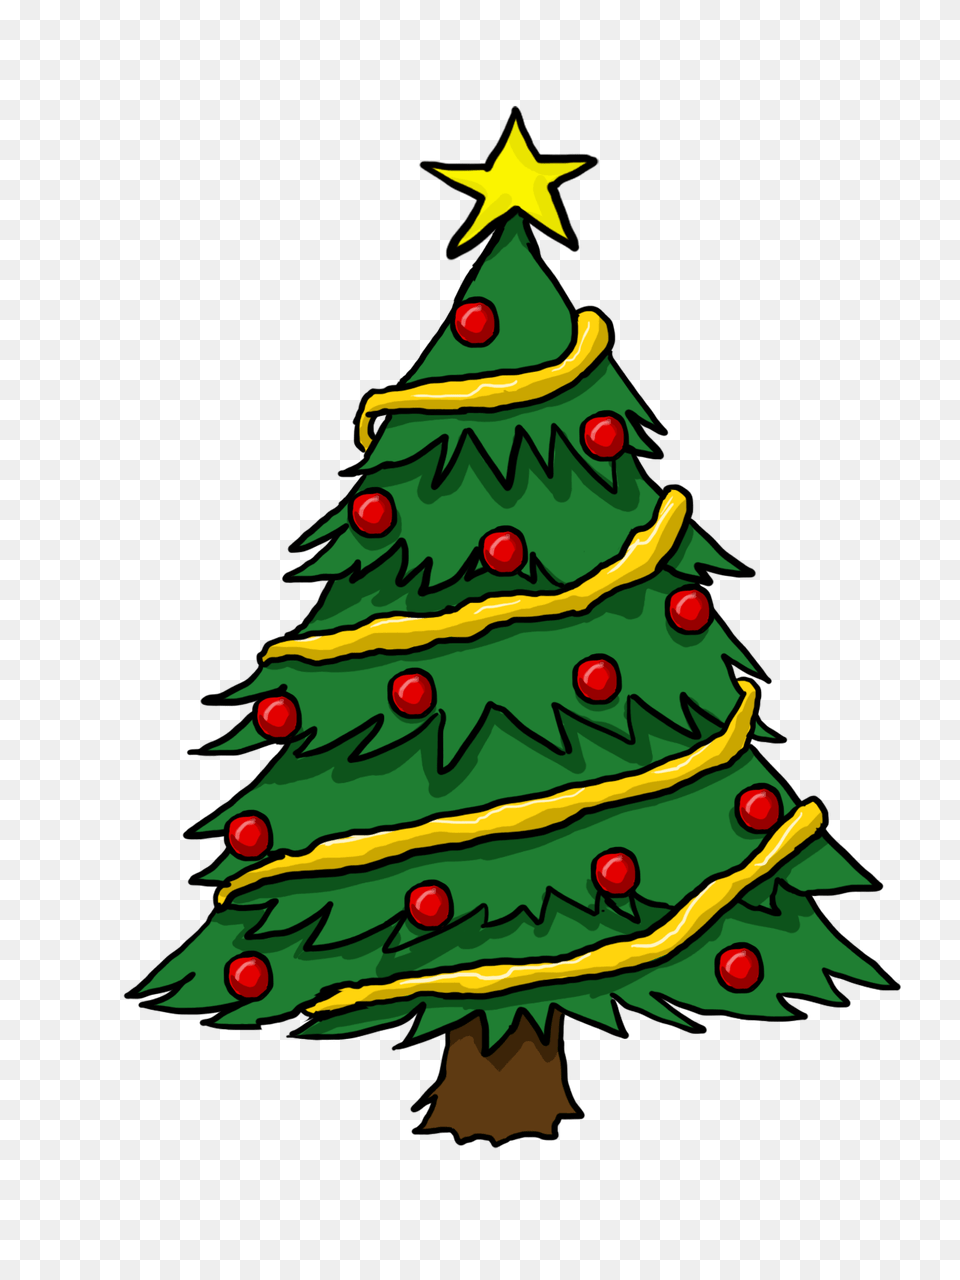 Cliparts, Plant, Tree, Christmas, Christmas Decorations Png Image